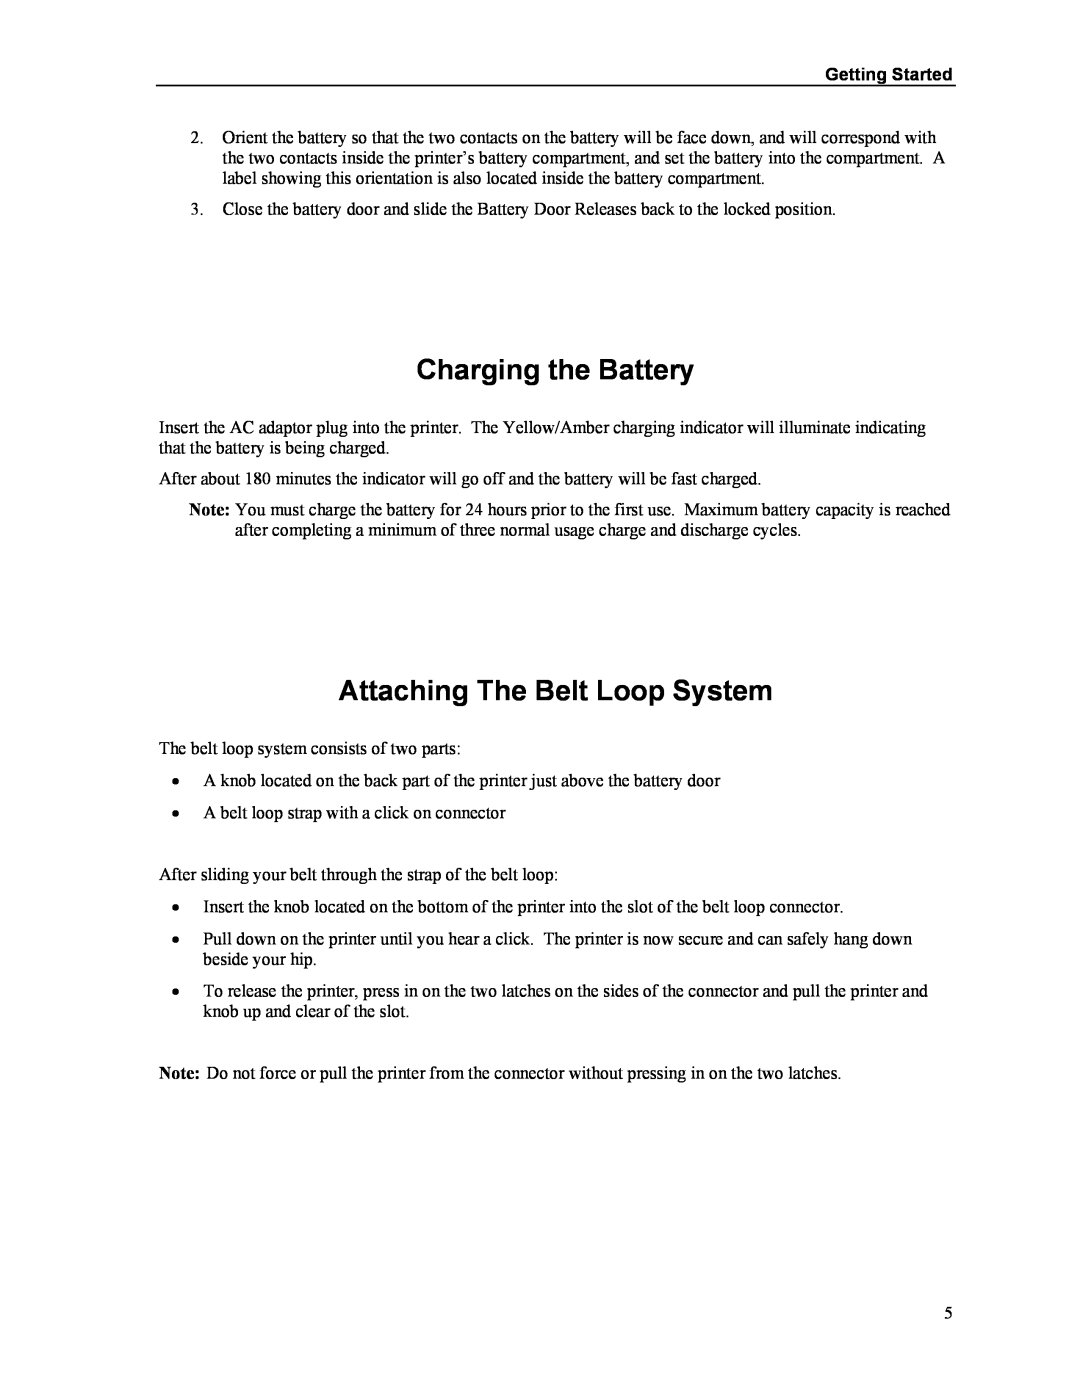 Printek Mt3-II manual Charging the Battery, Attaching The Belt Loop System, Getting Started 